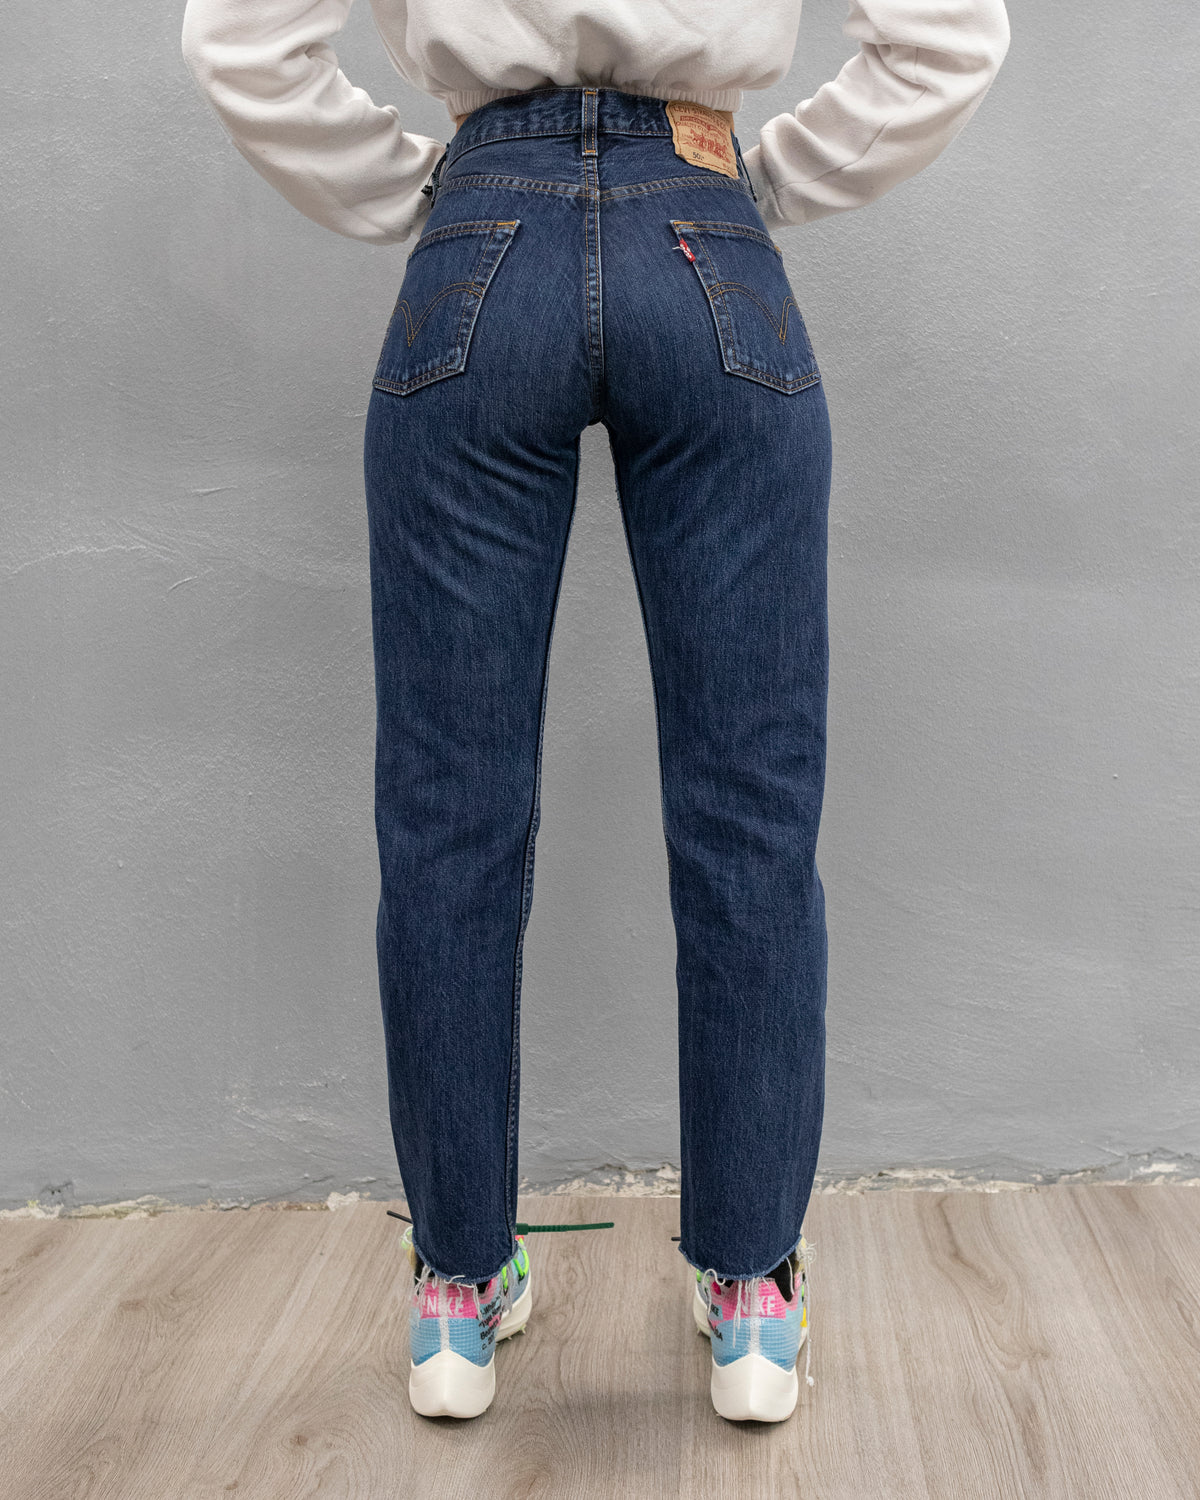 LEVI'S 501 Woman Jeans Revisited Dark Blue Washed